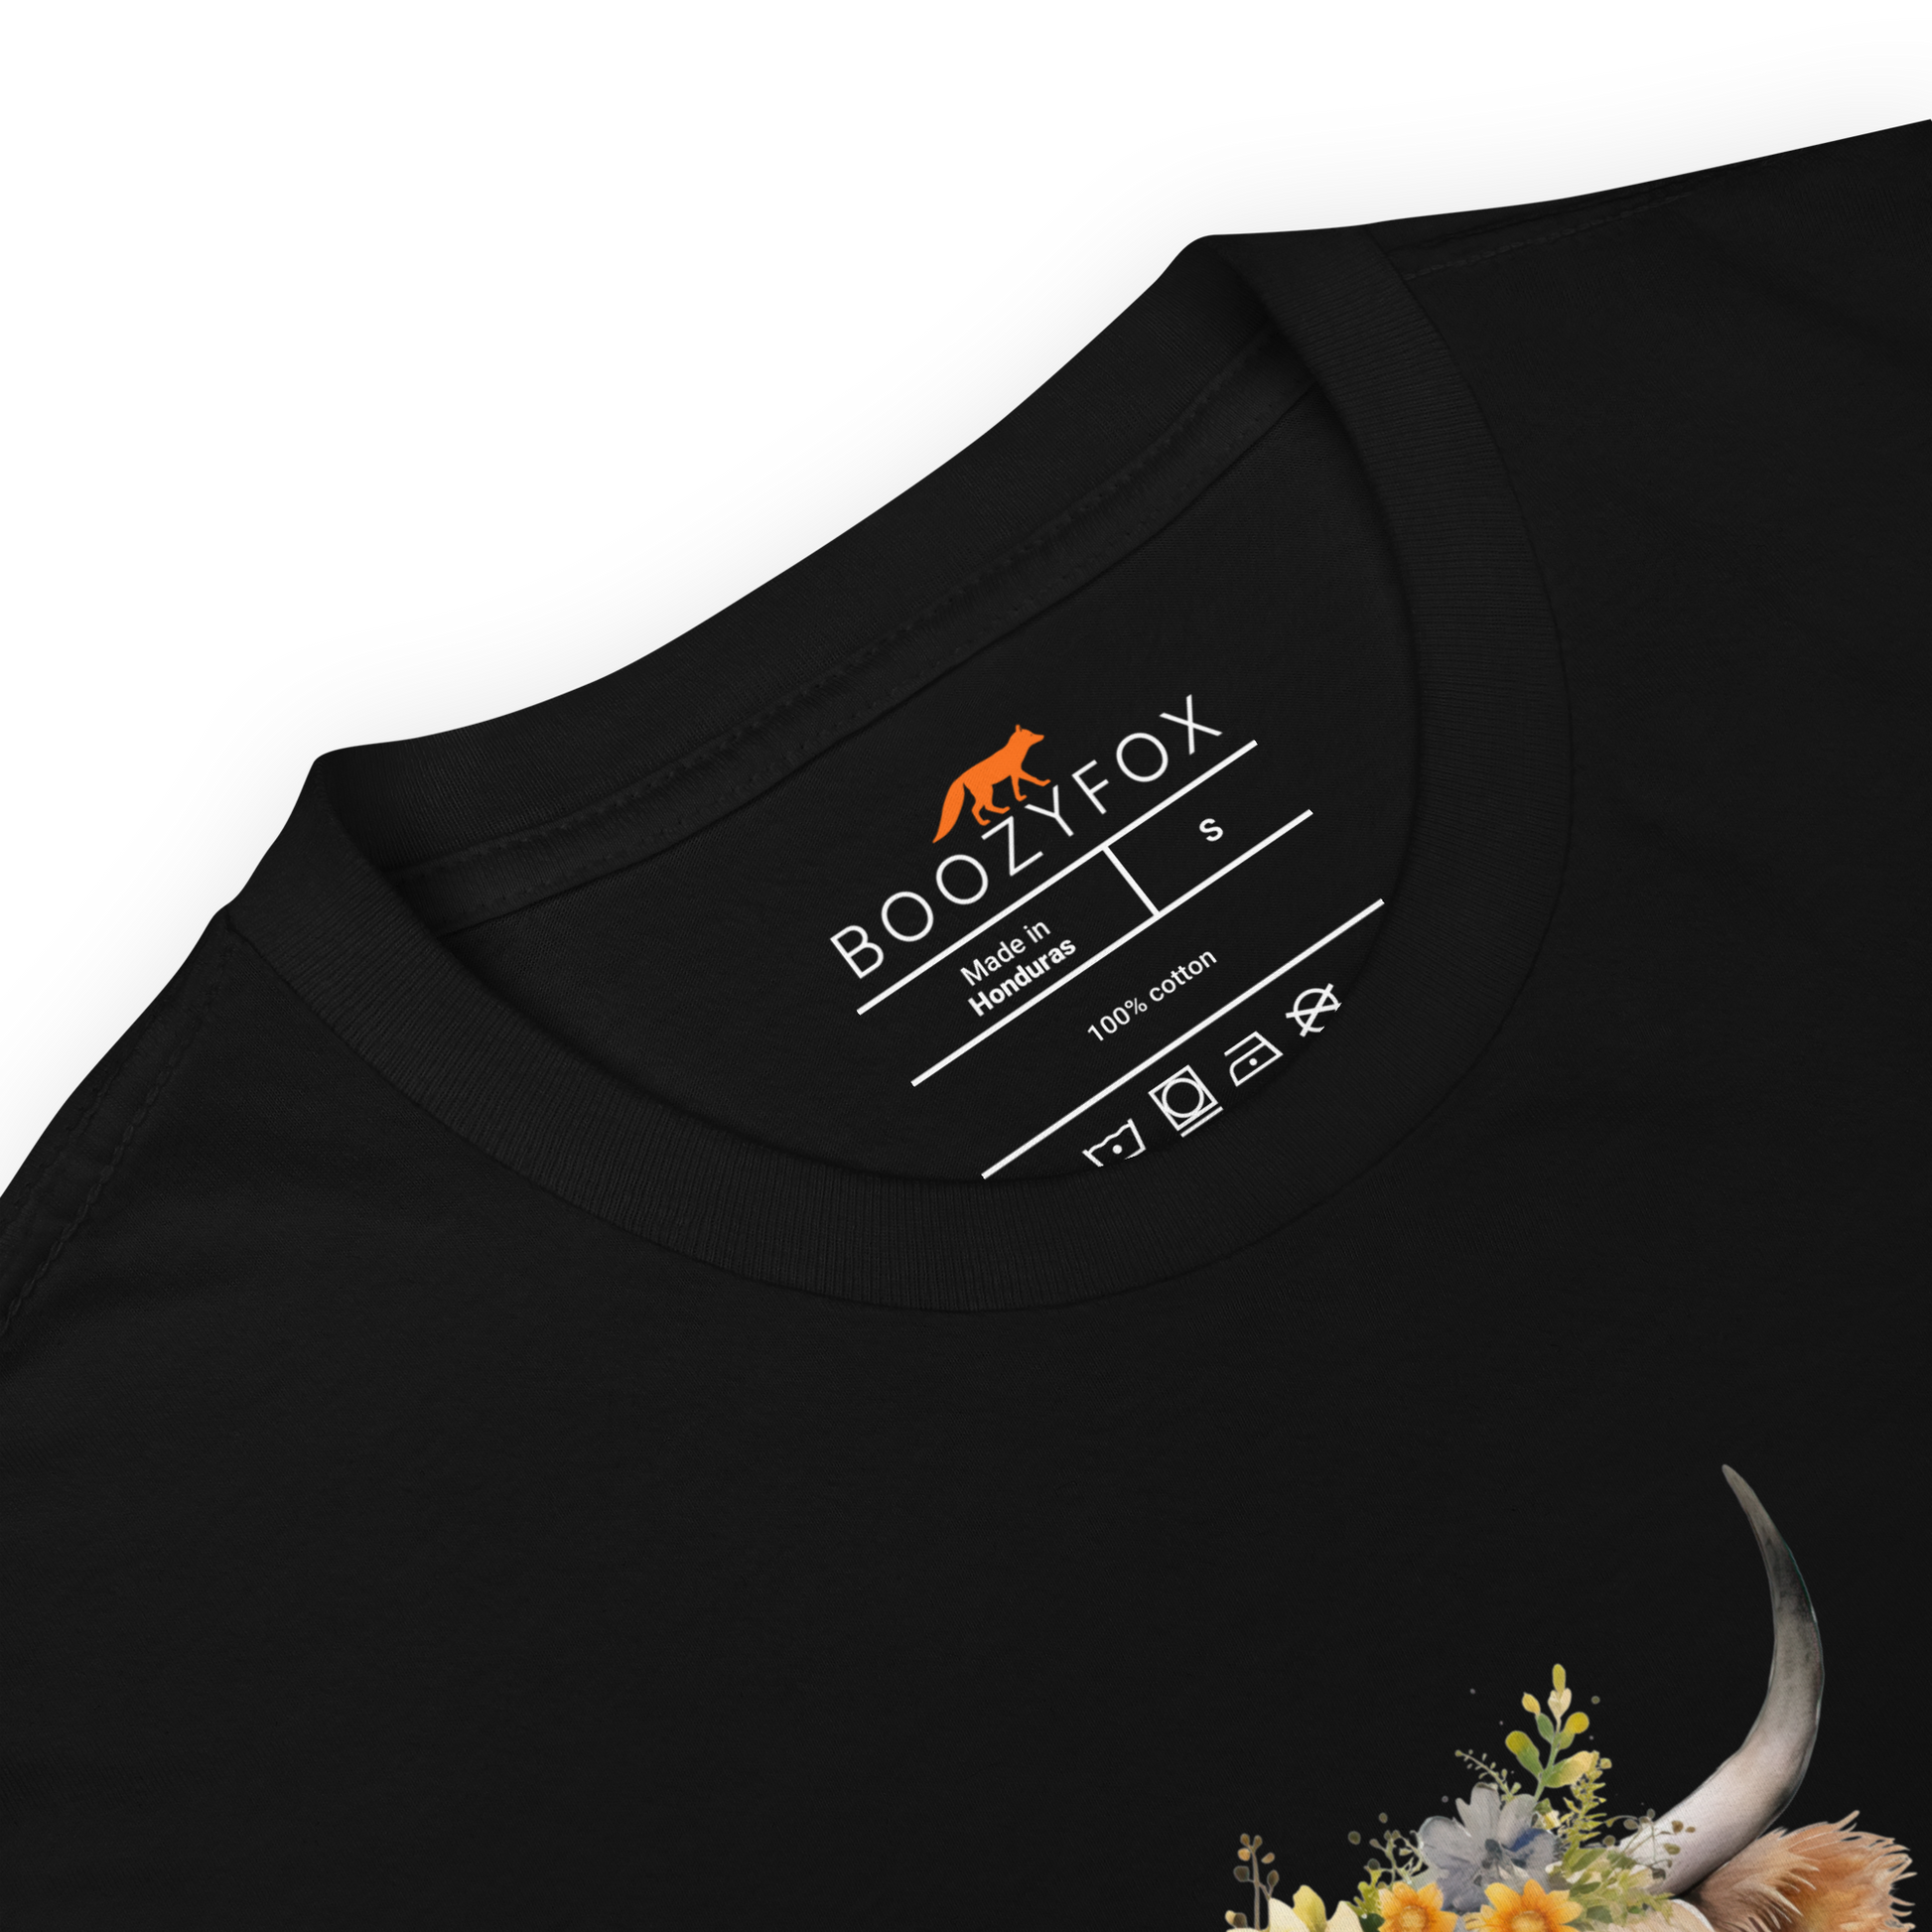 Product details of a Black Highland Cow T-Shirt featuring an adorable Highland Girl graphic on the chest - Cute Graphic Highland Cow T-Shirts - Boozy Fox